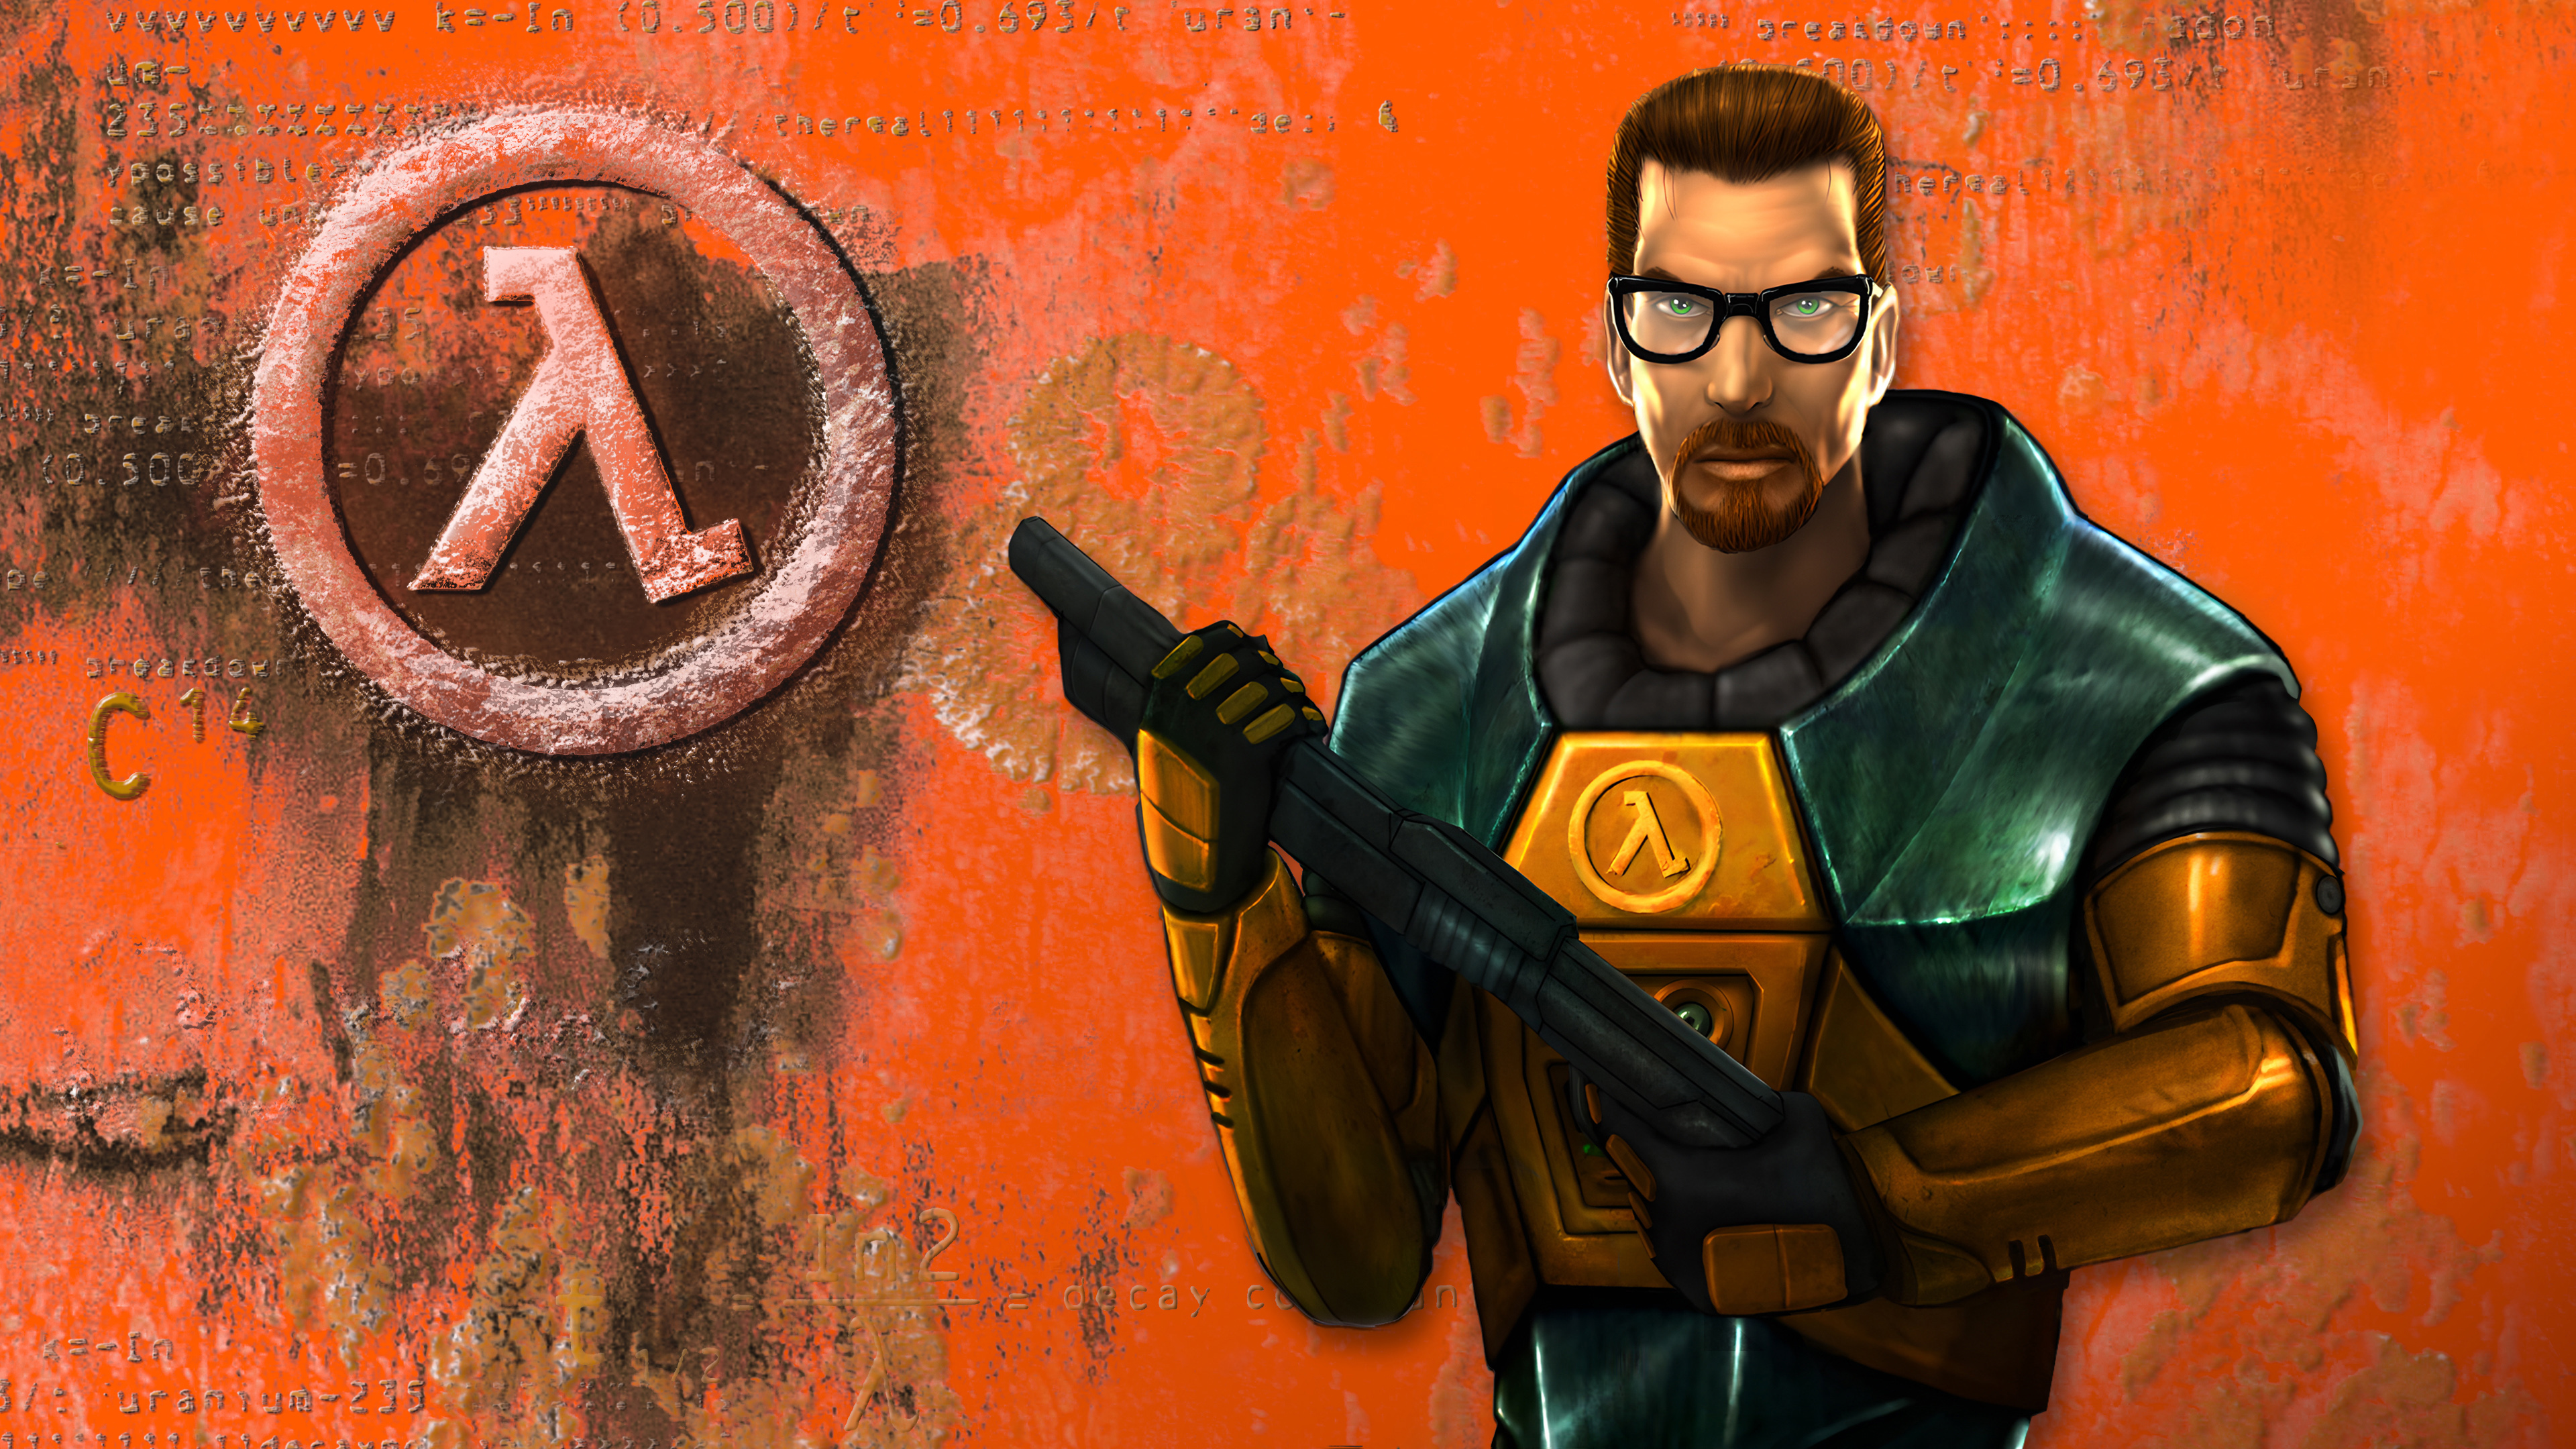 Valve just made Half-Life free and put out a massive update with cut content and an hour-long 'making of' documentary